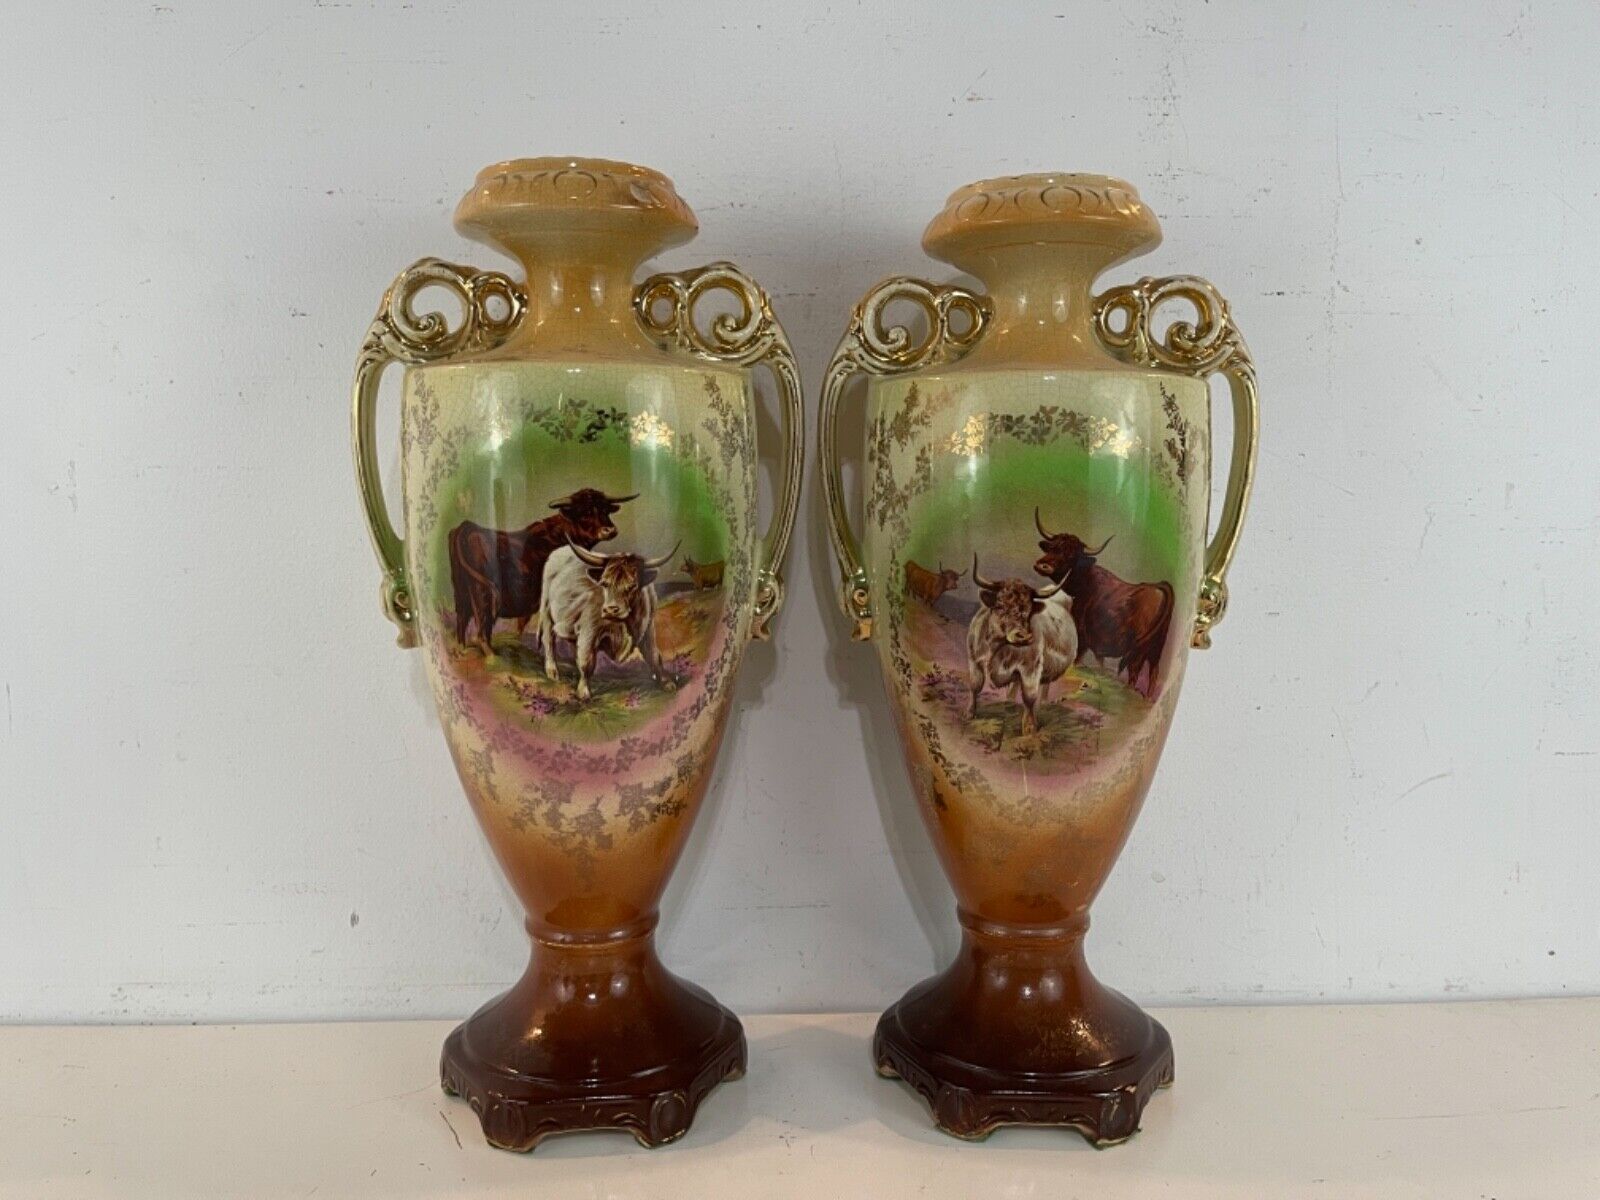 Antique Pair of Porcelain Handled Vases with Cattle Cow Decorations